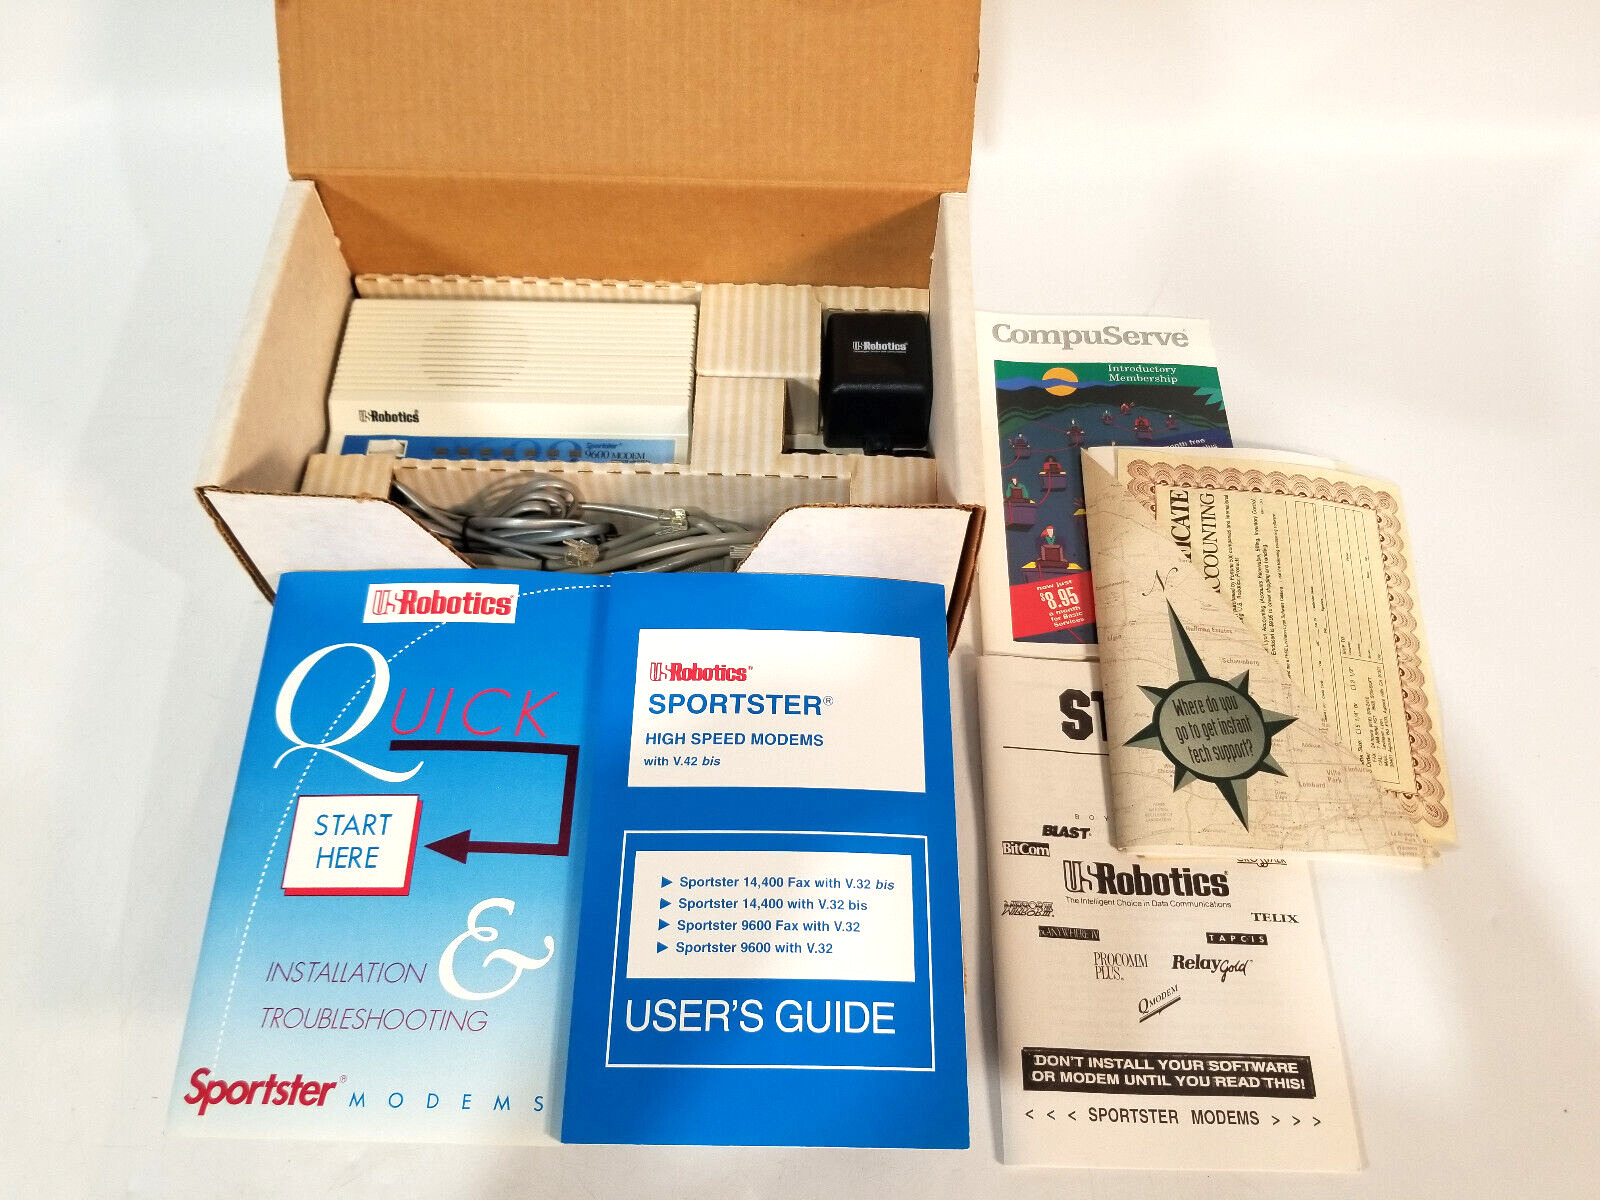 US Robotics 9600 Sportster External Modem -in box with all accessories, WORKING